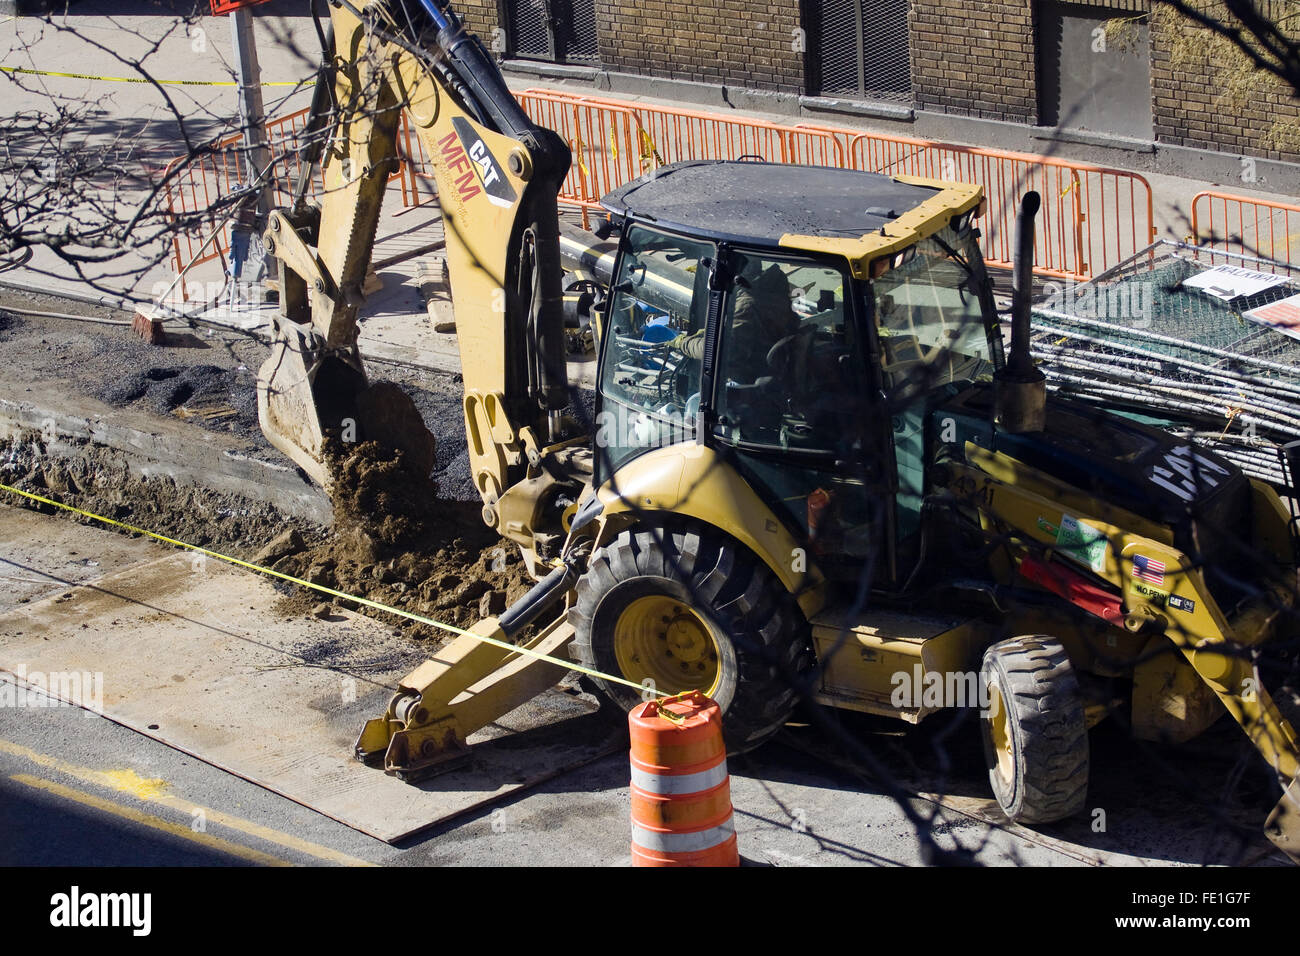 Construction Worker operating a yellow Backhoe made by the Caterpillar Corporation that is digging up a city street Stock Photo